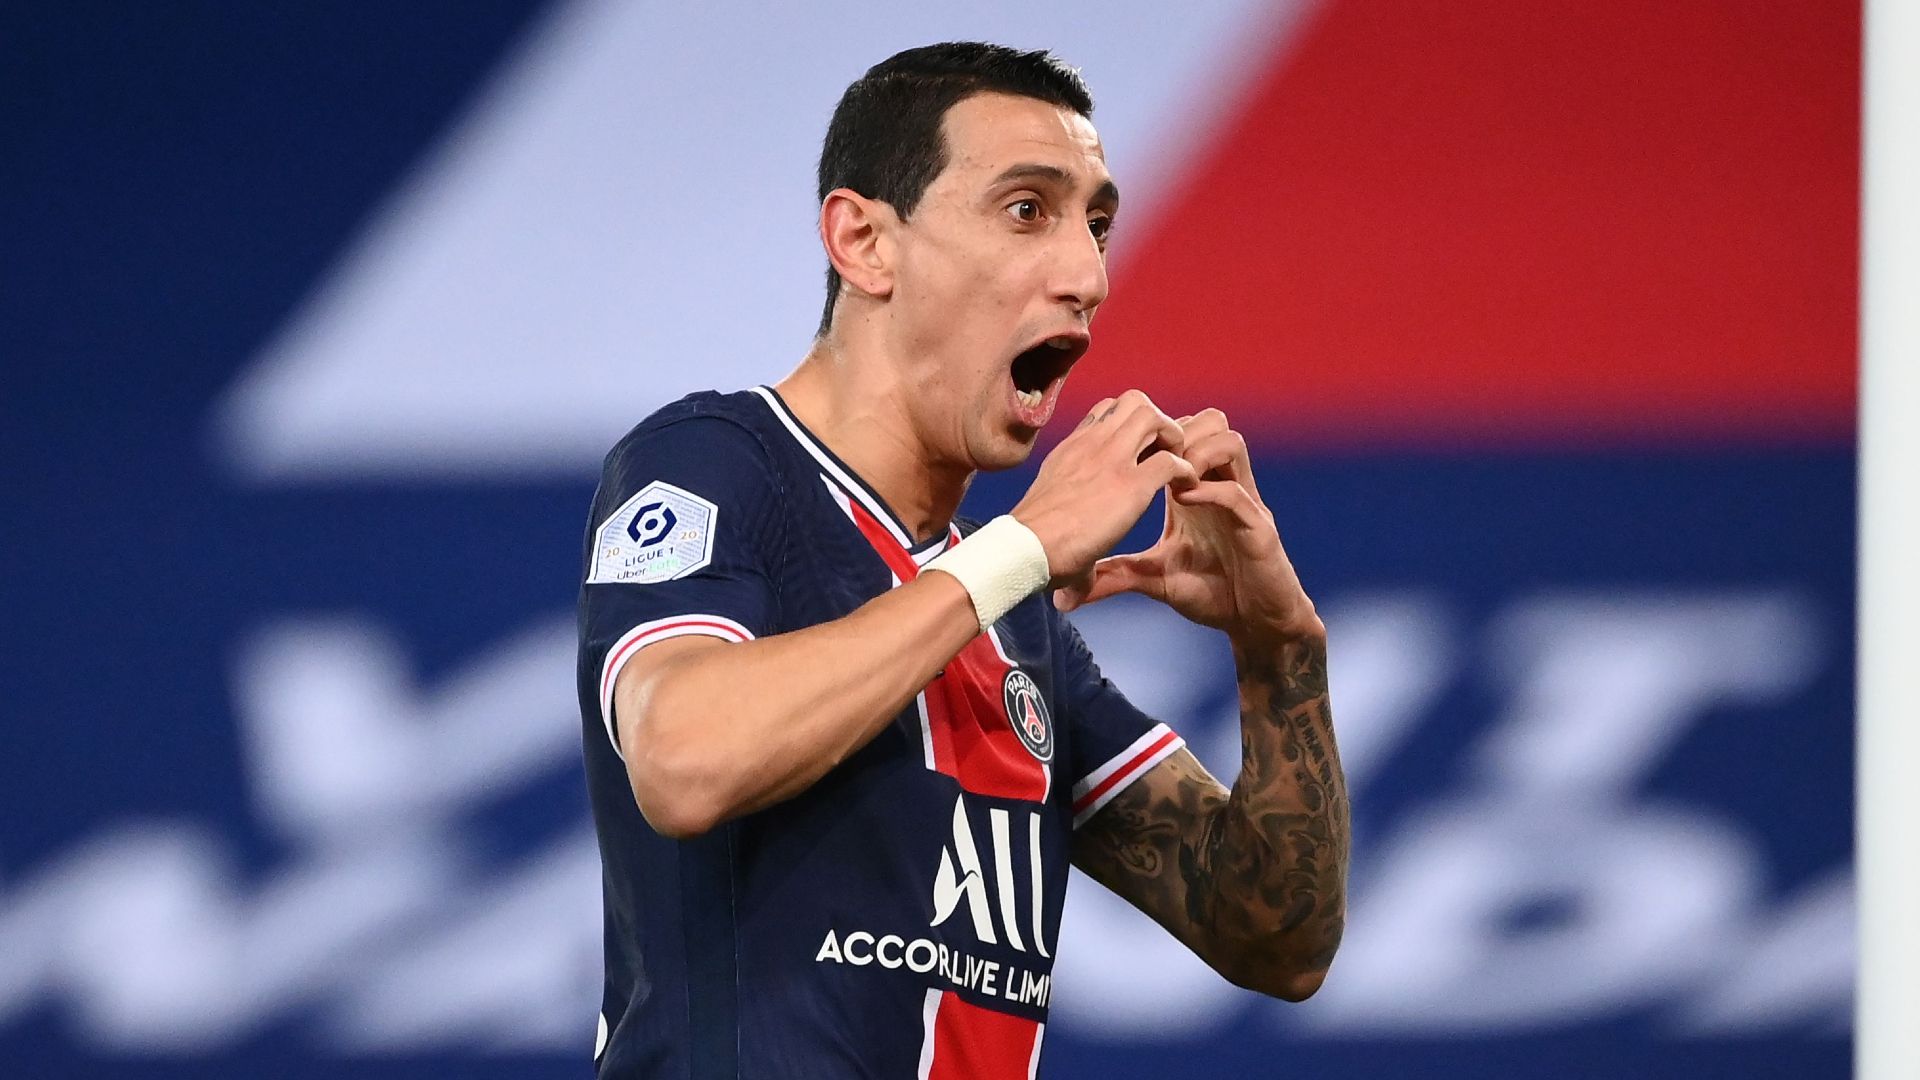 PSG Star Di Maria Signs One Year Contract Extension At Parc Des Princes Until 2022